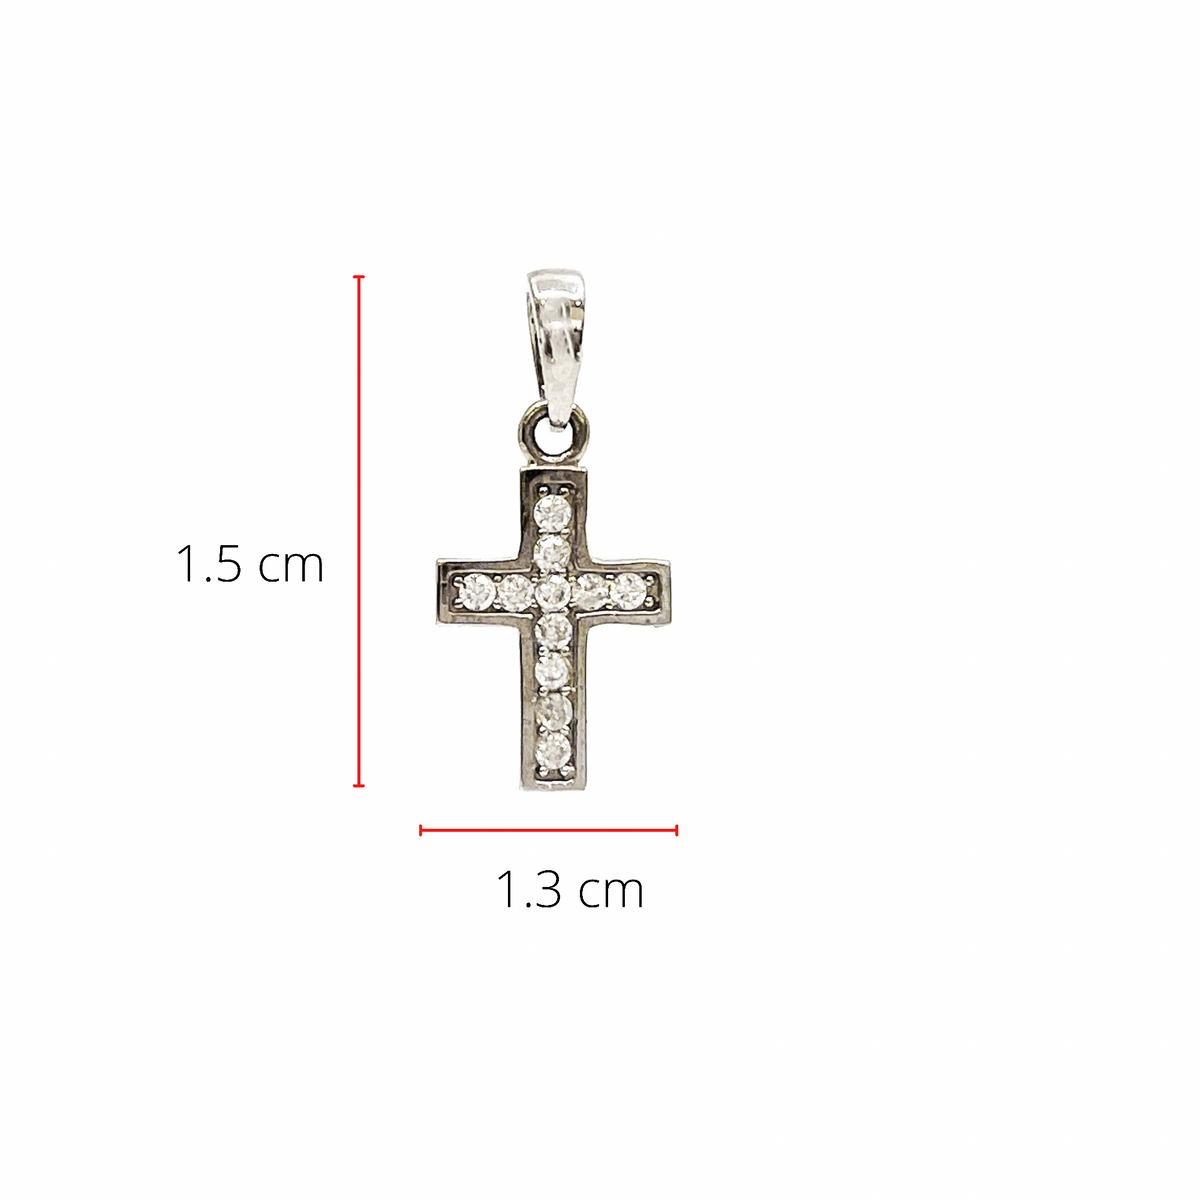 10K White Gold Cross with Cubic Zirconia Charm